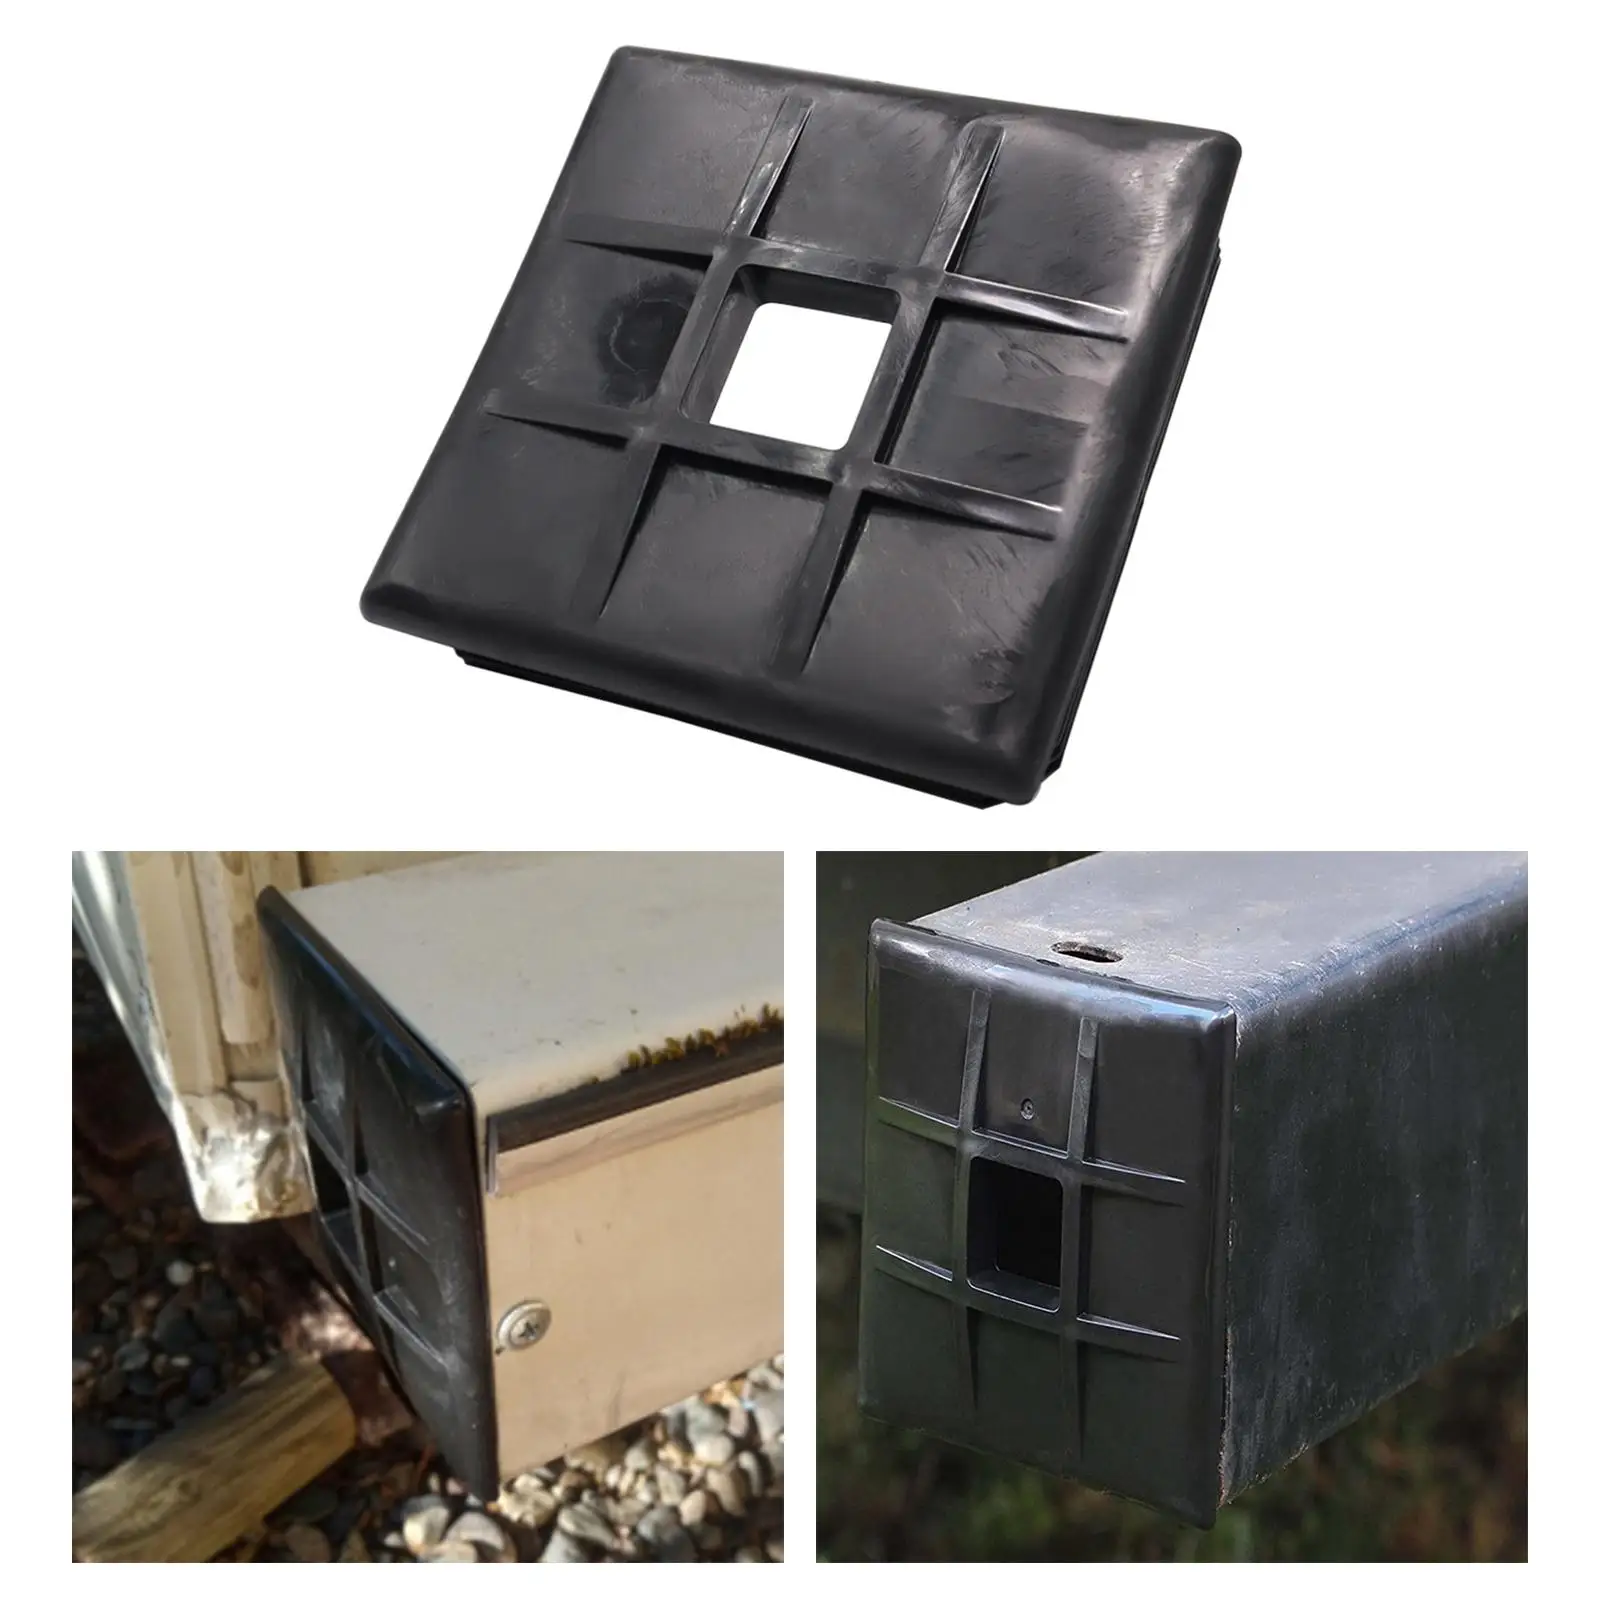 4inch Bumper Plug End Cover for RV Travel Trailer Replaces Easily Install with Square Hole in Middle